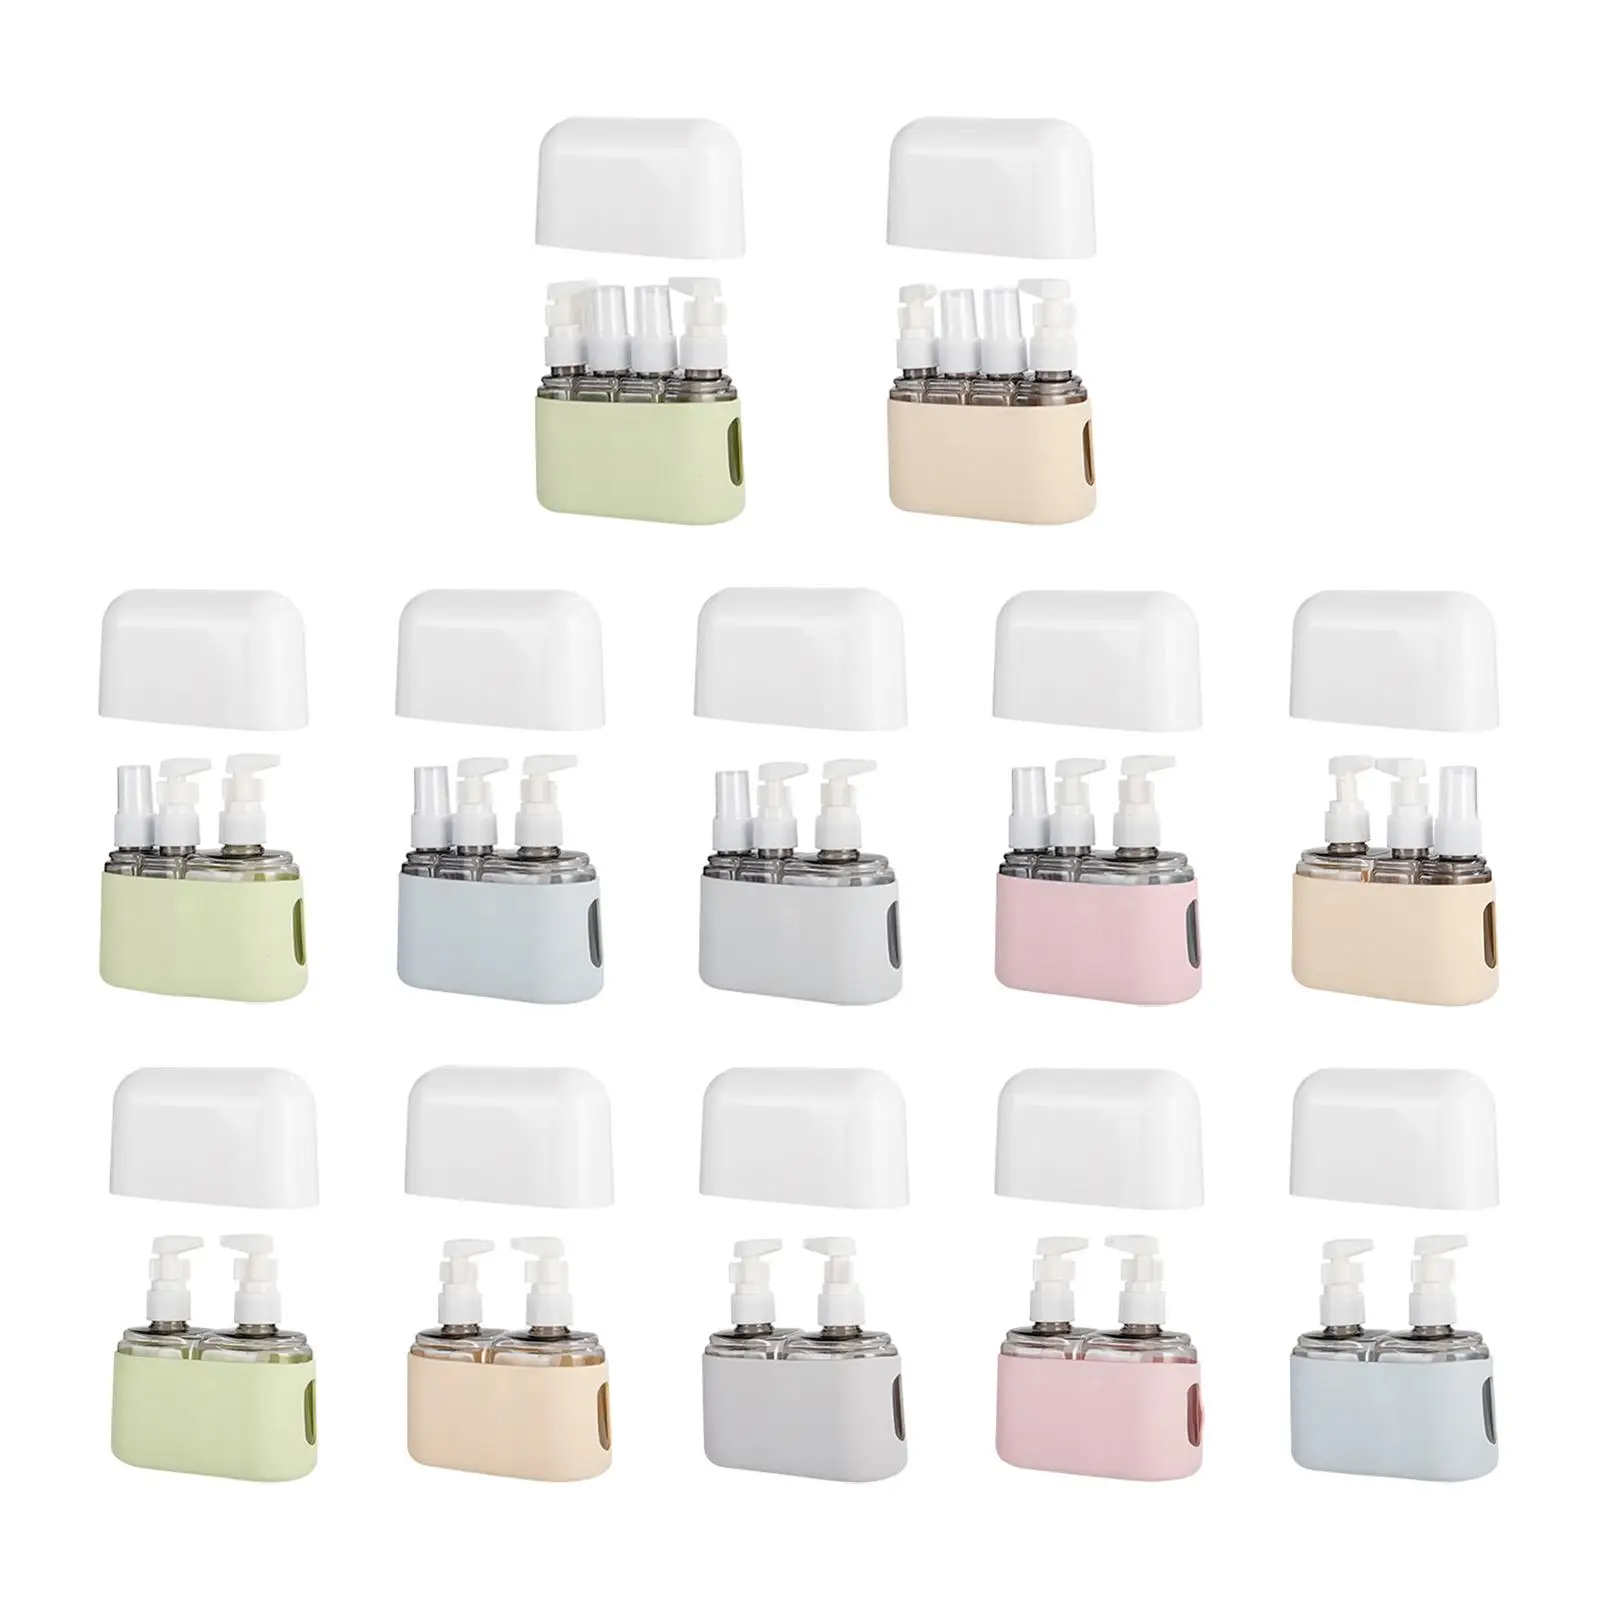 Travel Bottles for Toiletries Leakproof Compact Size Airplane Accessories for Body Wash Perfumes Cosmetics Foam Soap Conditioner